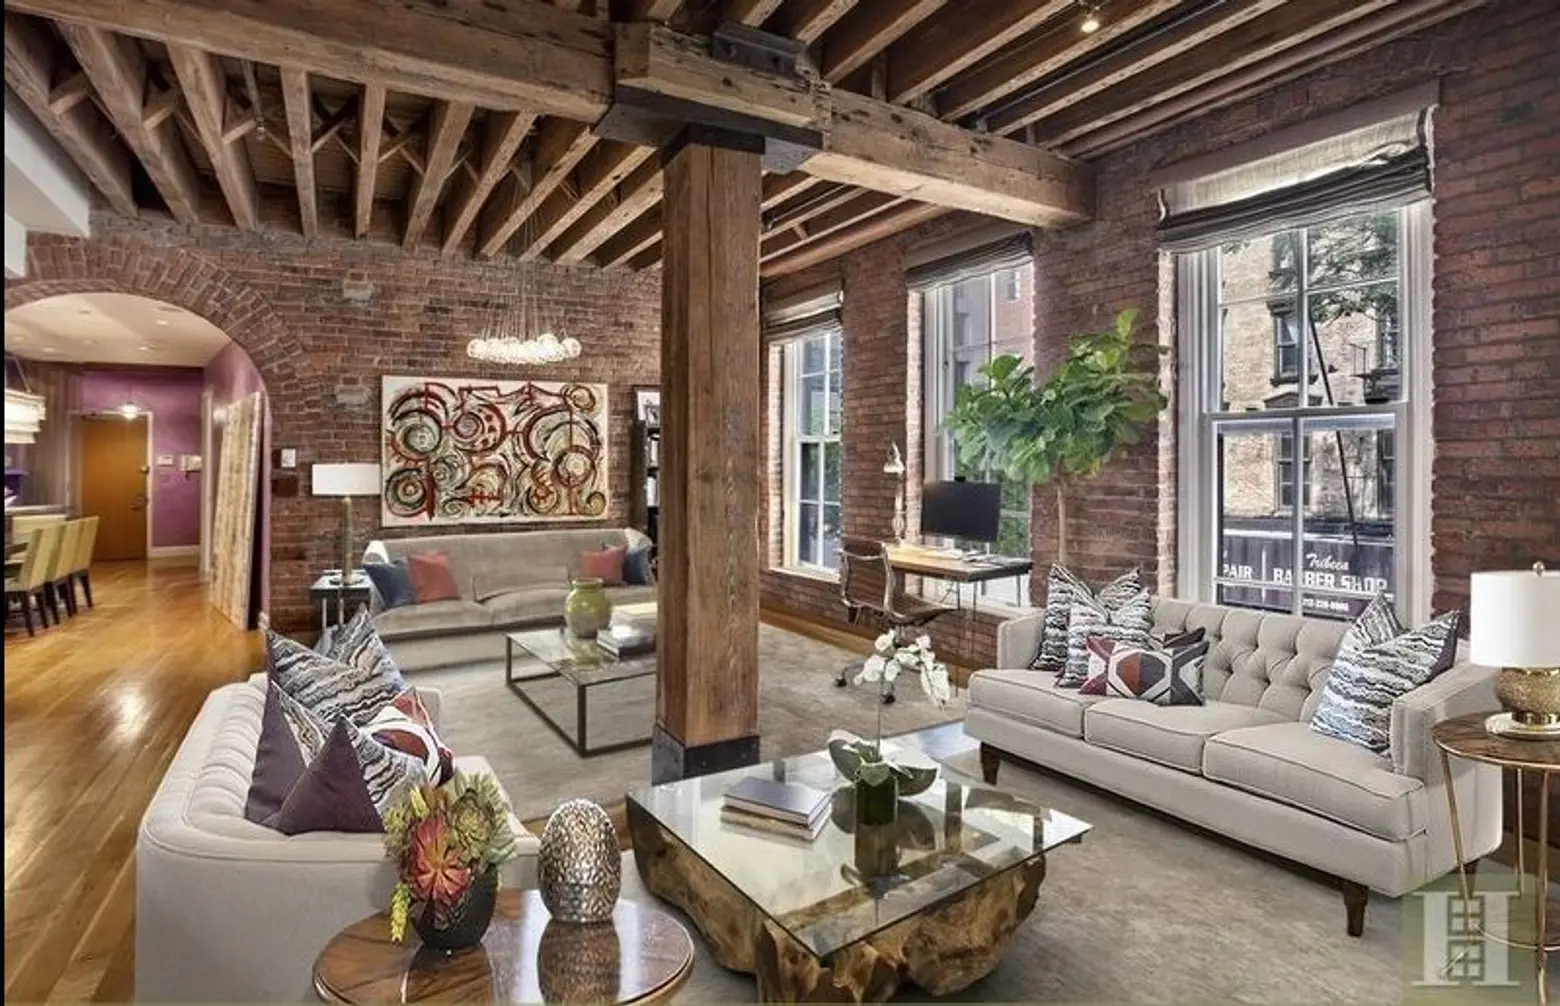 Michael Bloomberg’s daughter looking to sell Tribeca loft for $3.5 million